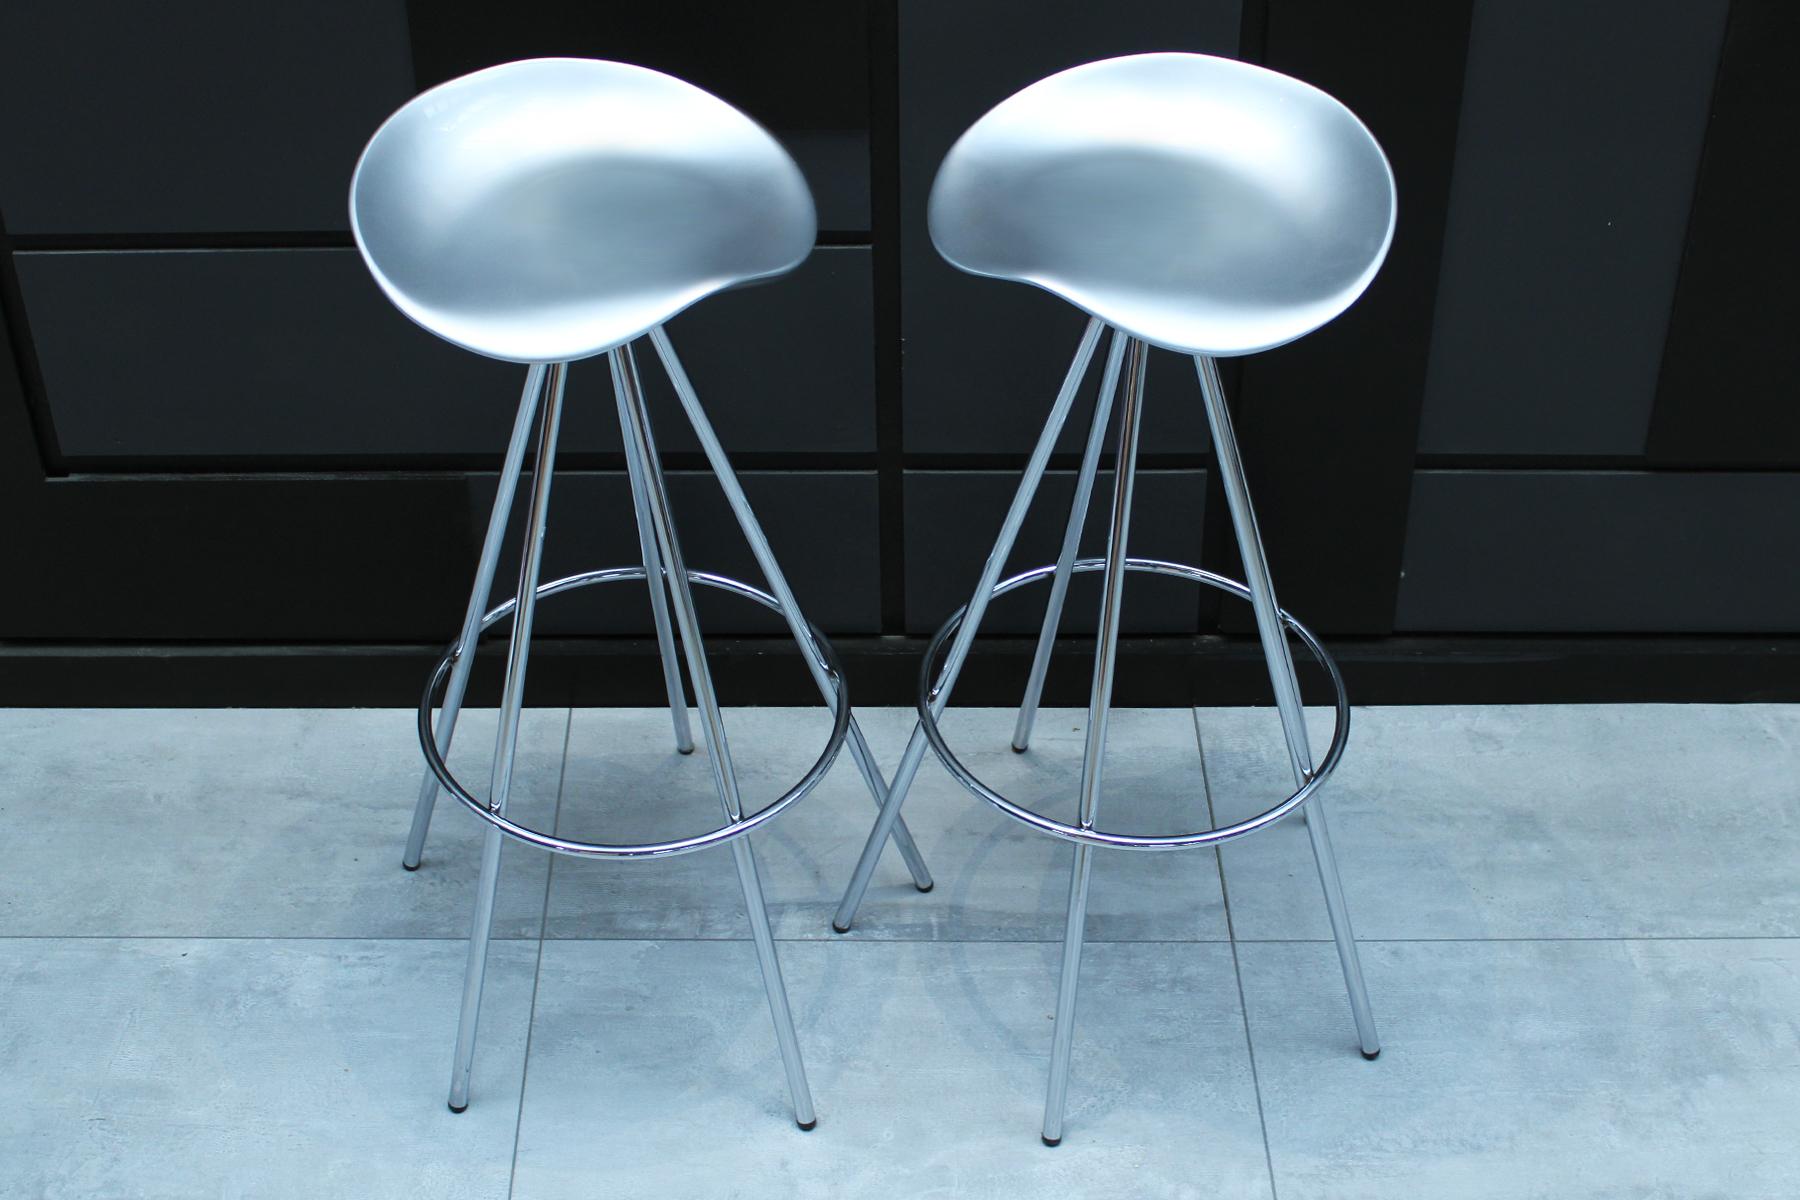 A pair of first edition 1990s 'Jamaica' chrome and aluminium bar or kitchen stools designed by Pepe Cortes and produced in Spain by Amat-3 for Knoll. These chairs feature a ‘saddle’ like seat that is actually surprisingly comfortable. Both chairs